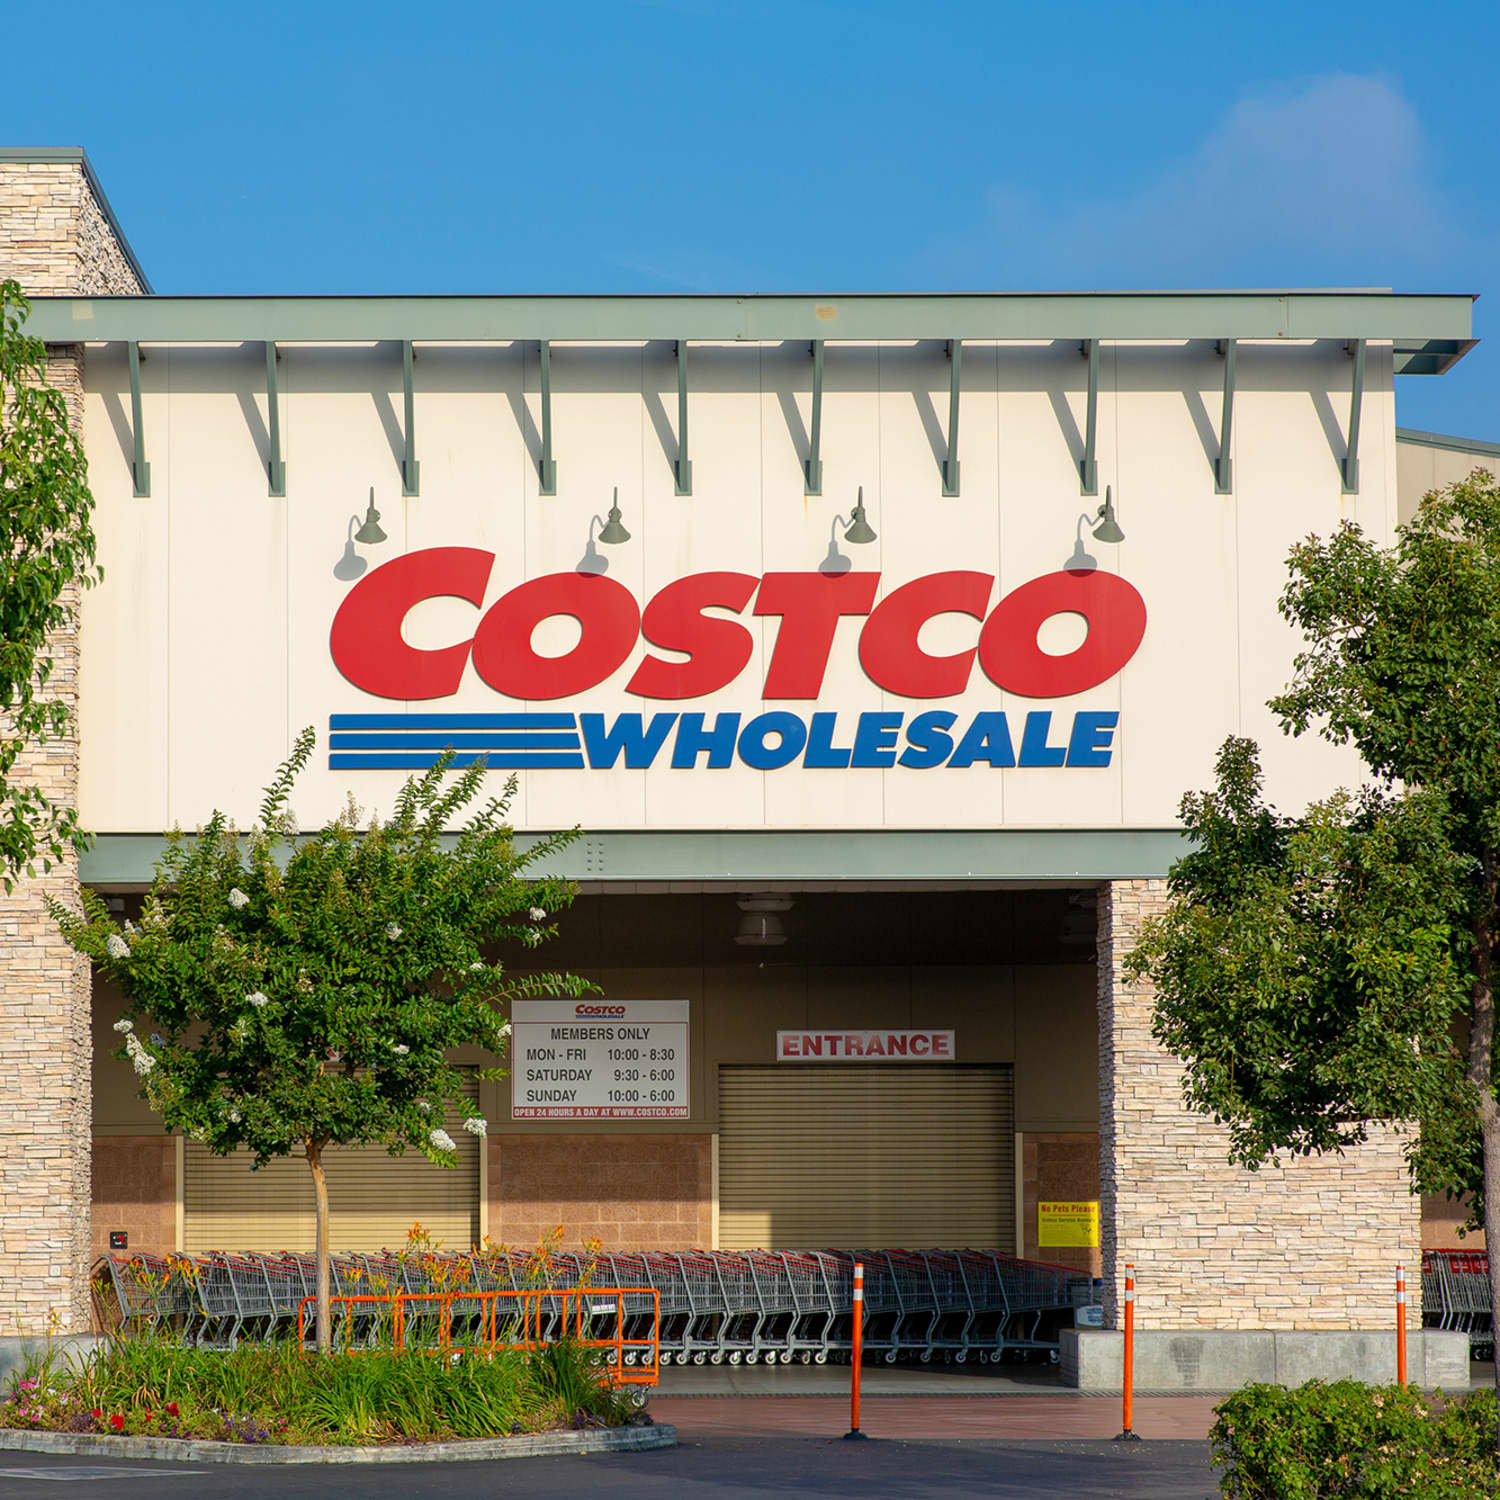 The Best Food Storage Container Sets at Costco